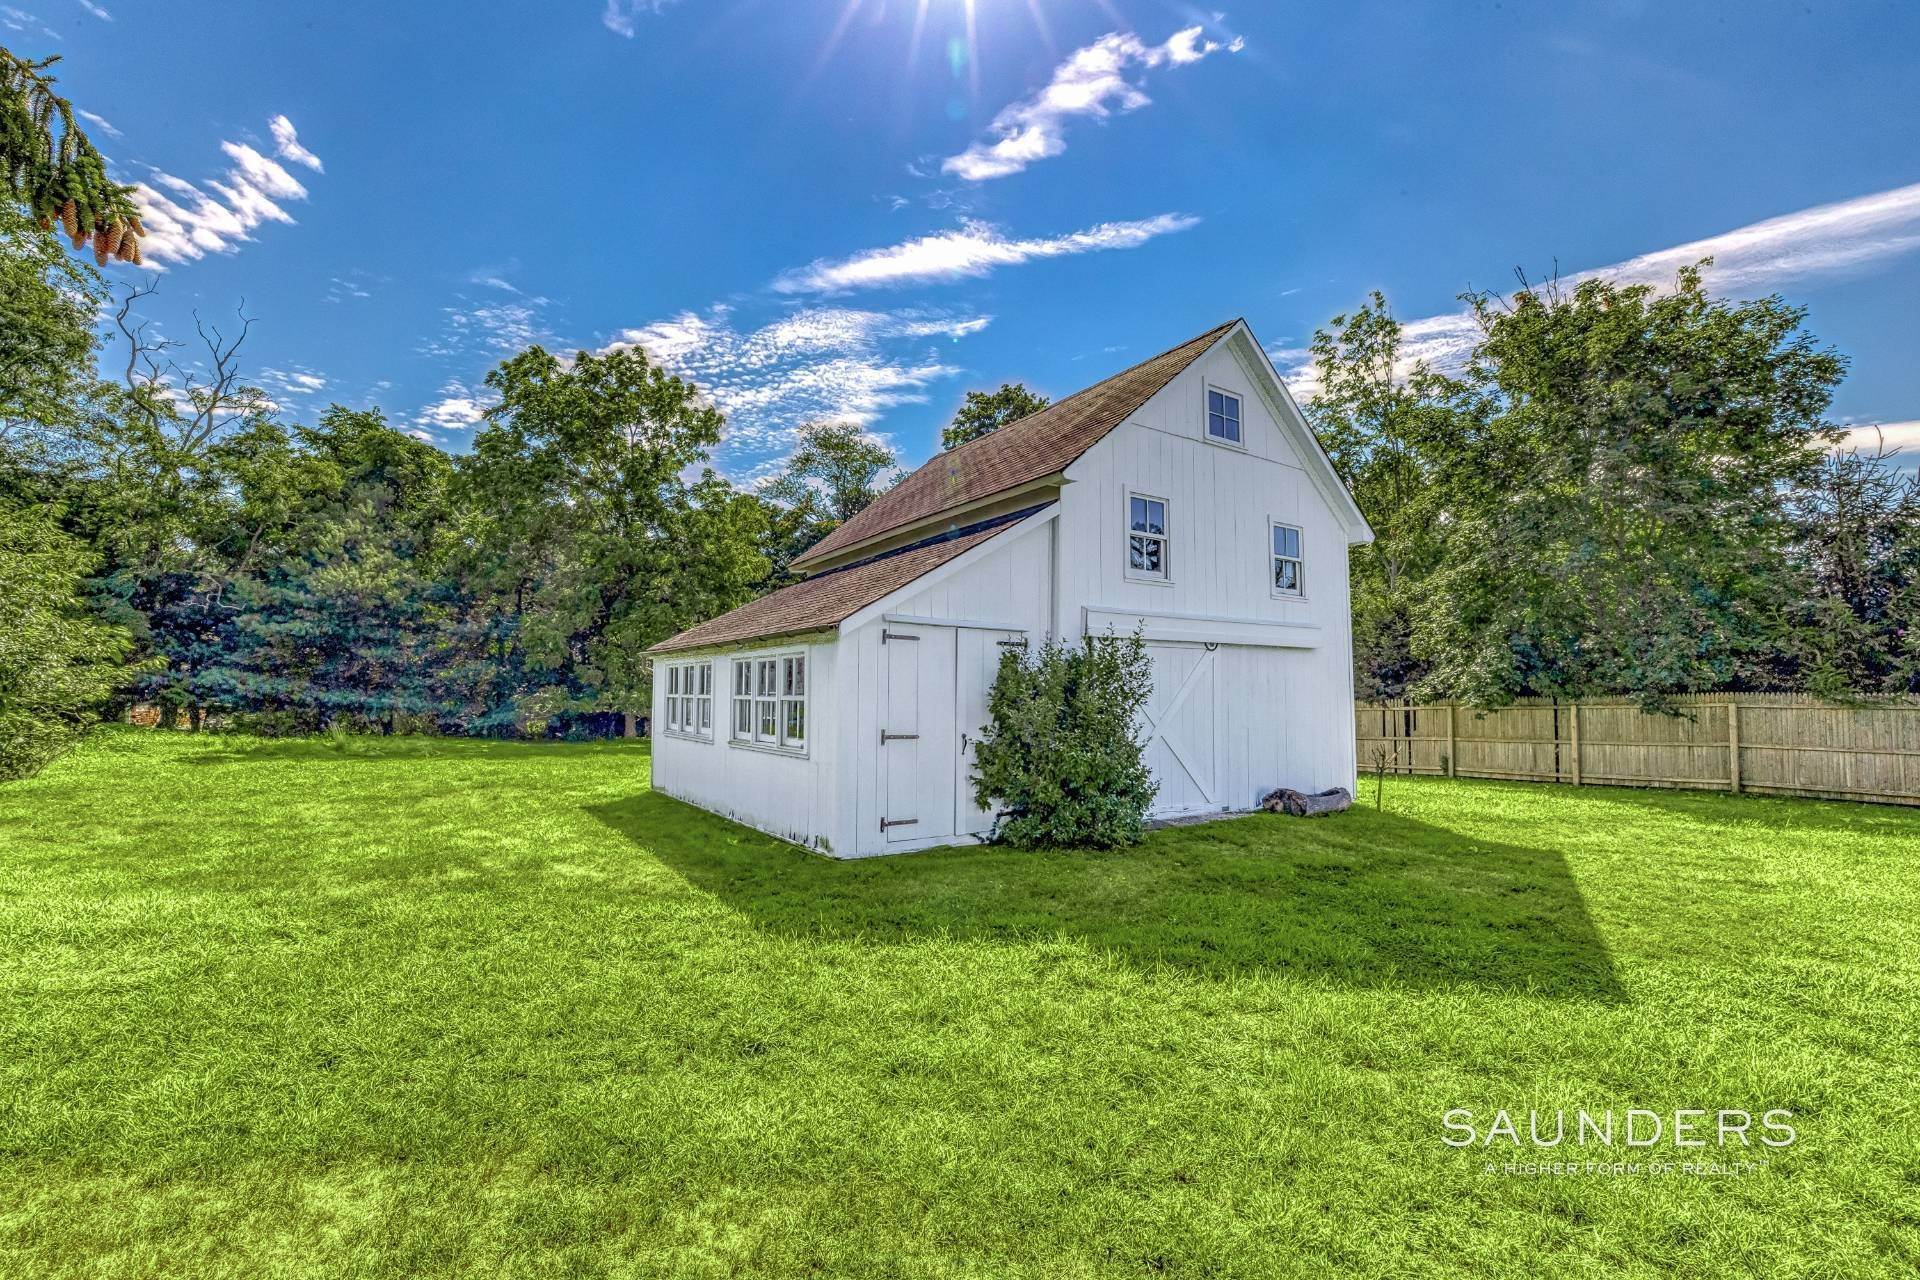 47. Single Family Homes for Sale at Shelter Island Restored 1900 Farmhouse With Barn 9 Sunshine Road, Shelter Island, NY 11964